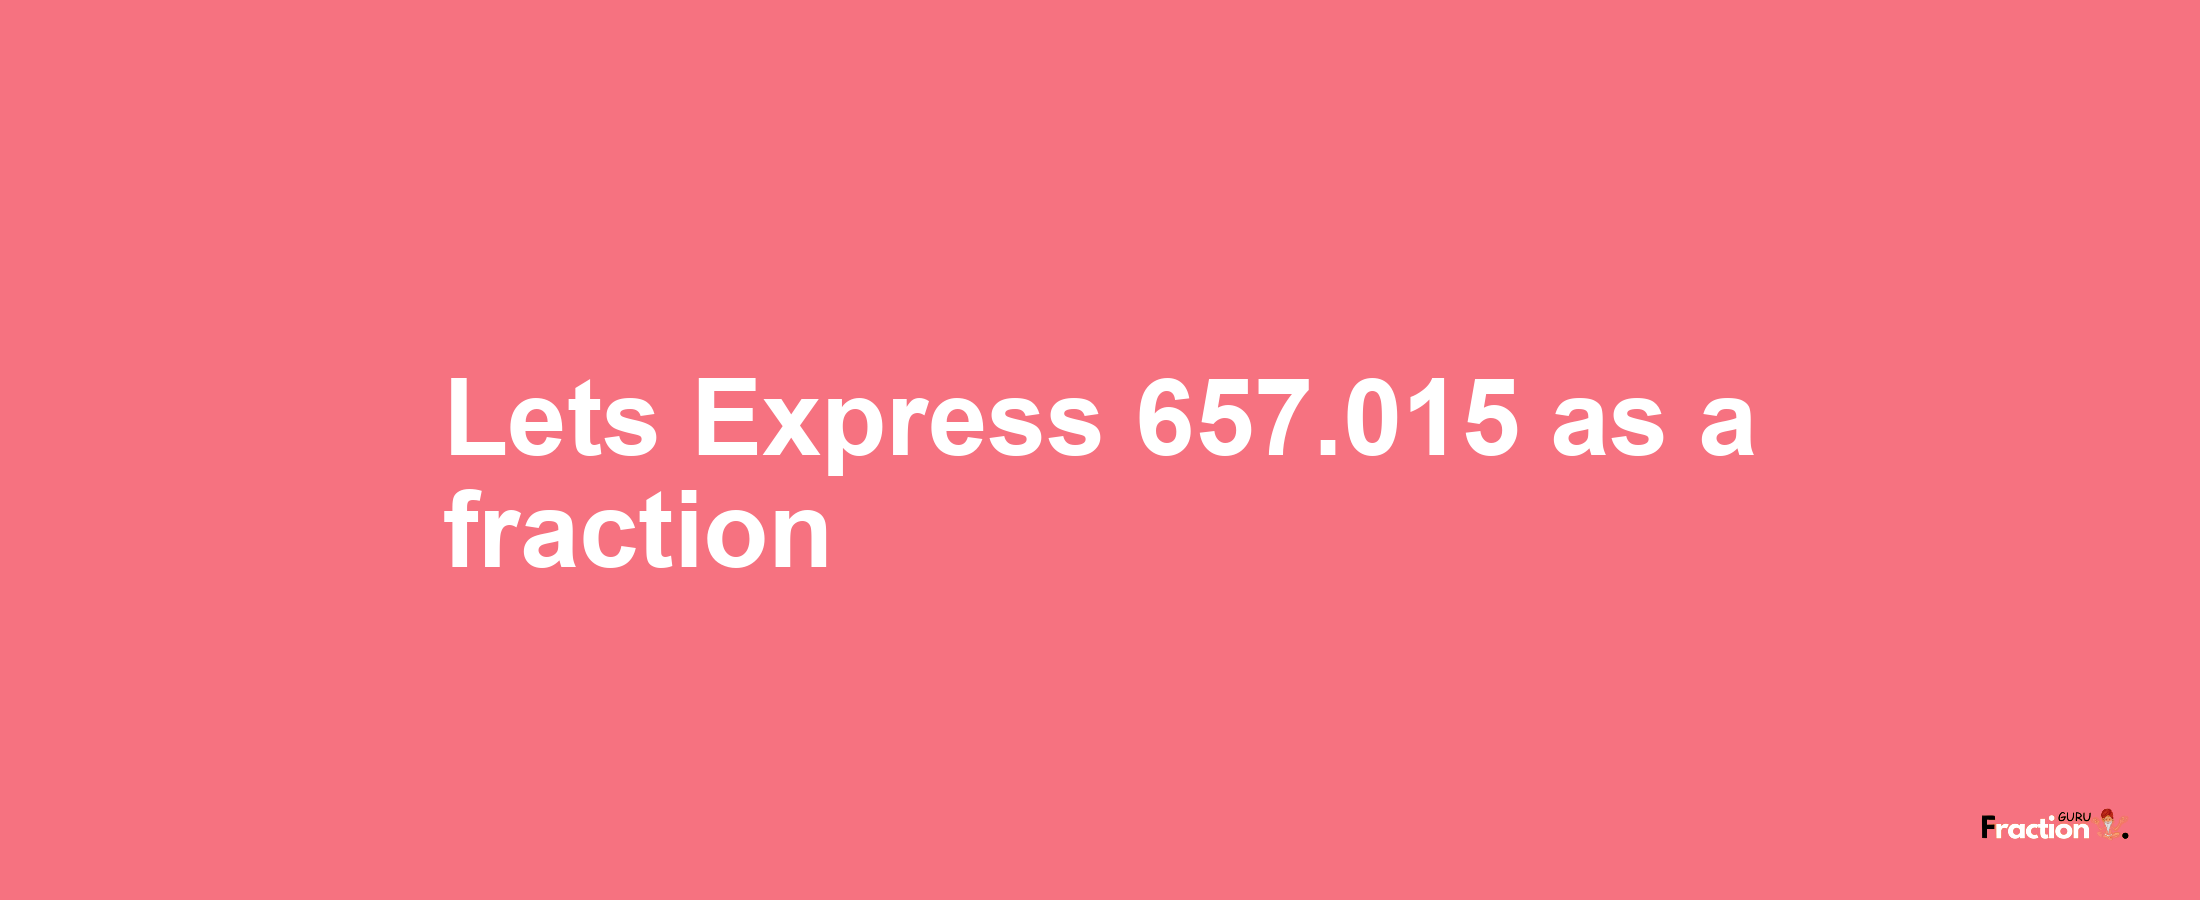 Lets Express 657.015 as afraction